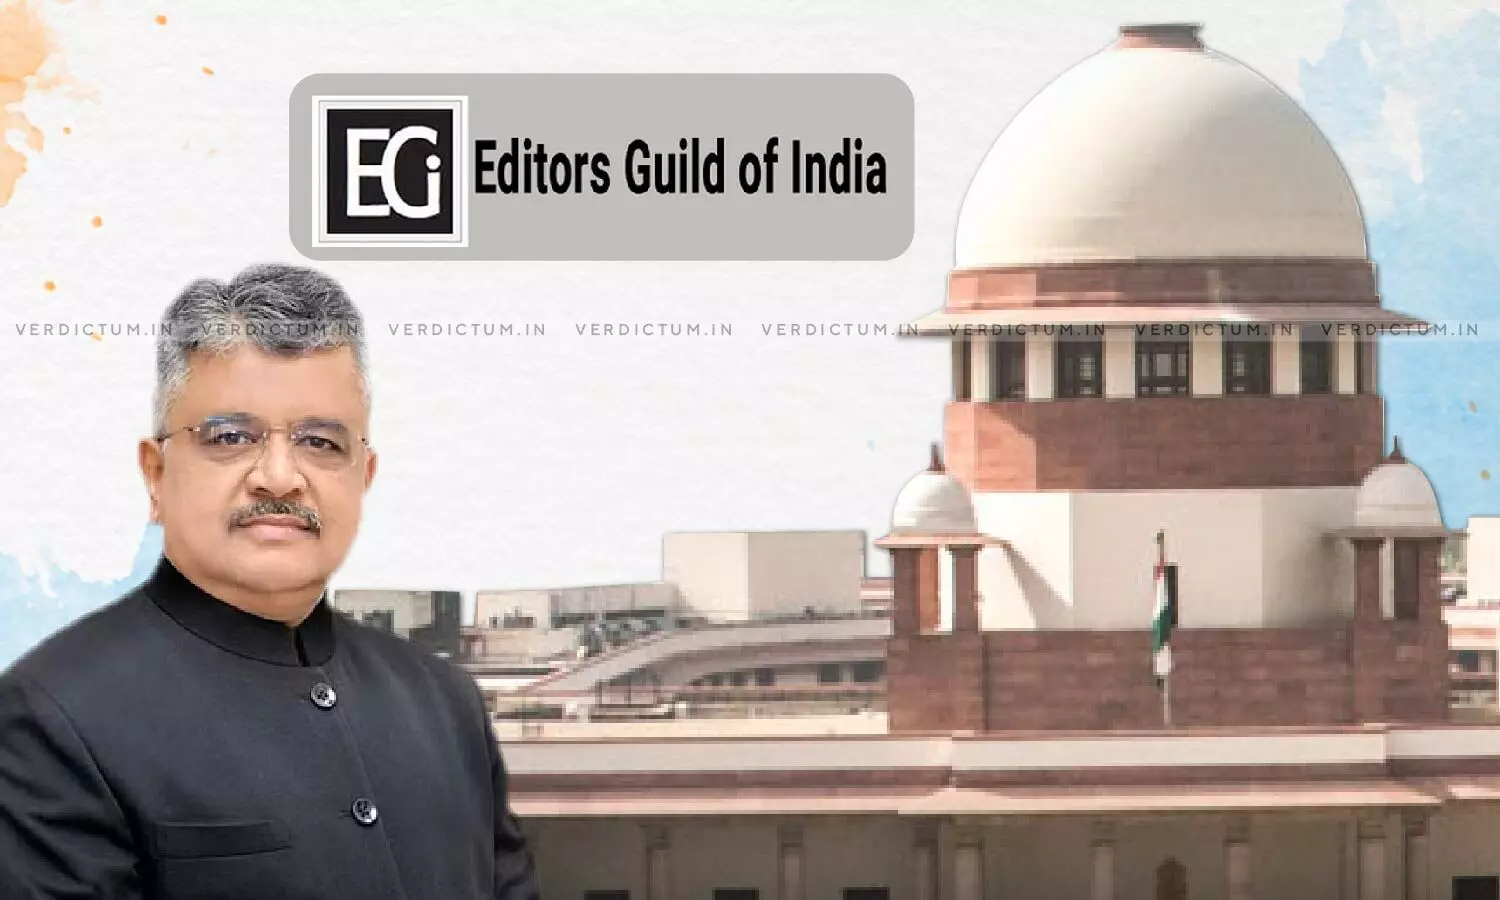 Editors Guild Of India Wants To Make It A National Political Issue By Approaching SC To Quash Manipur FIRs: Solicitor General Tushar Mehta